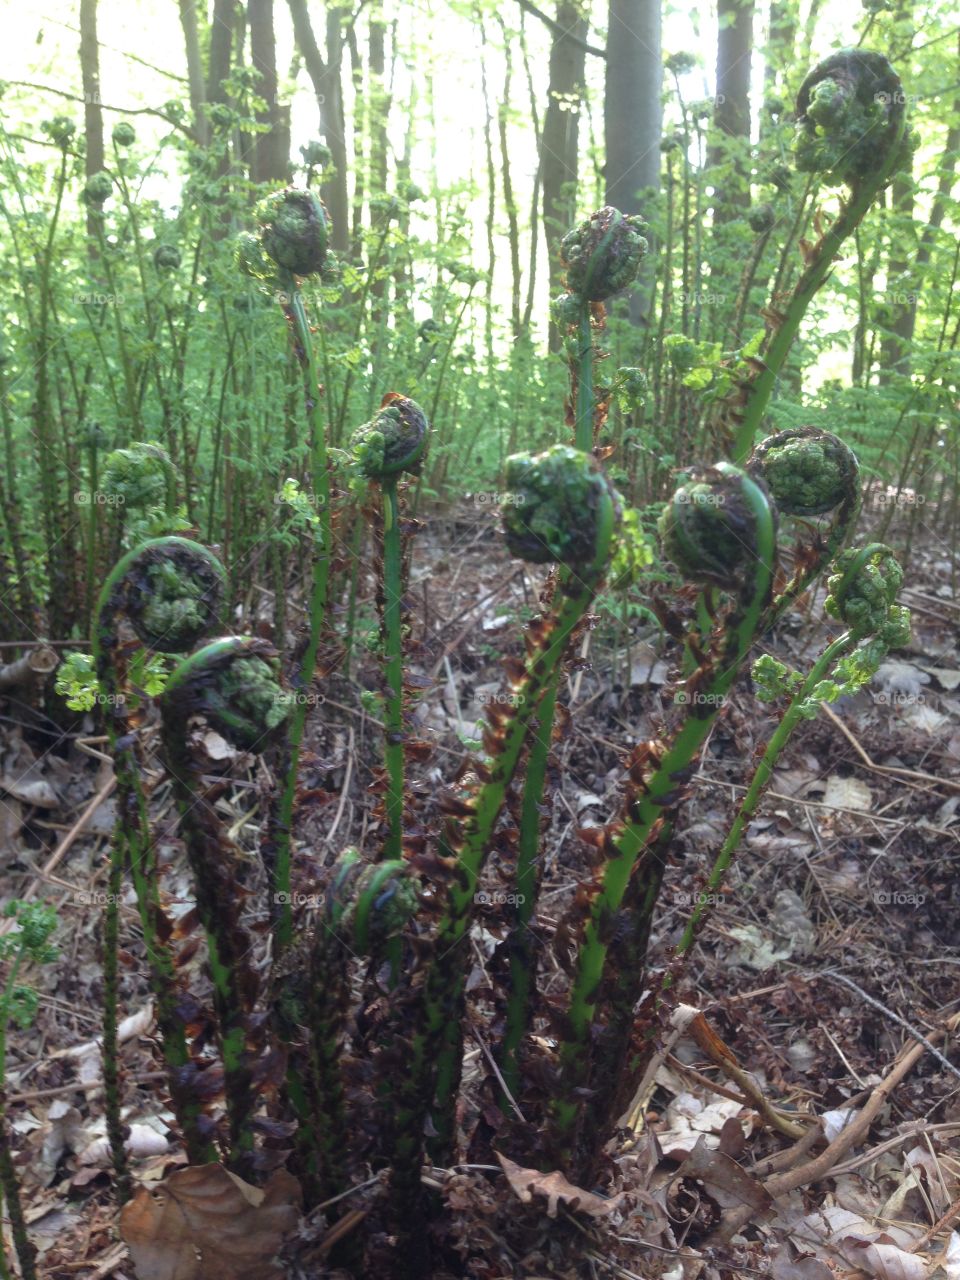 Fern leaves growing in the woods of Drenthe, Netherlands.